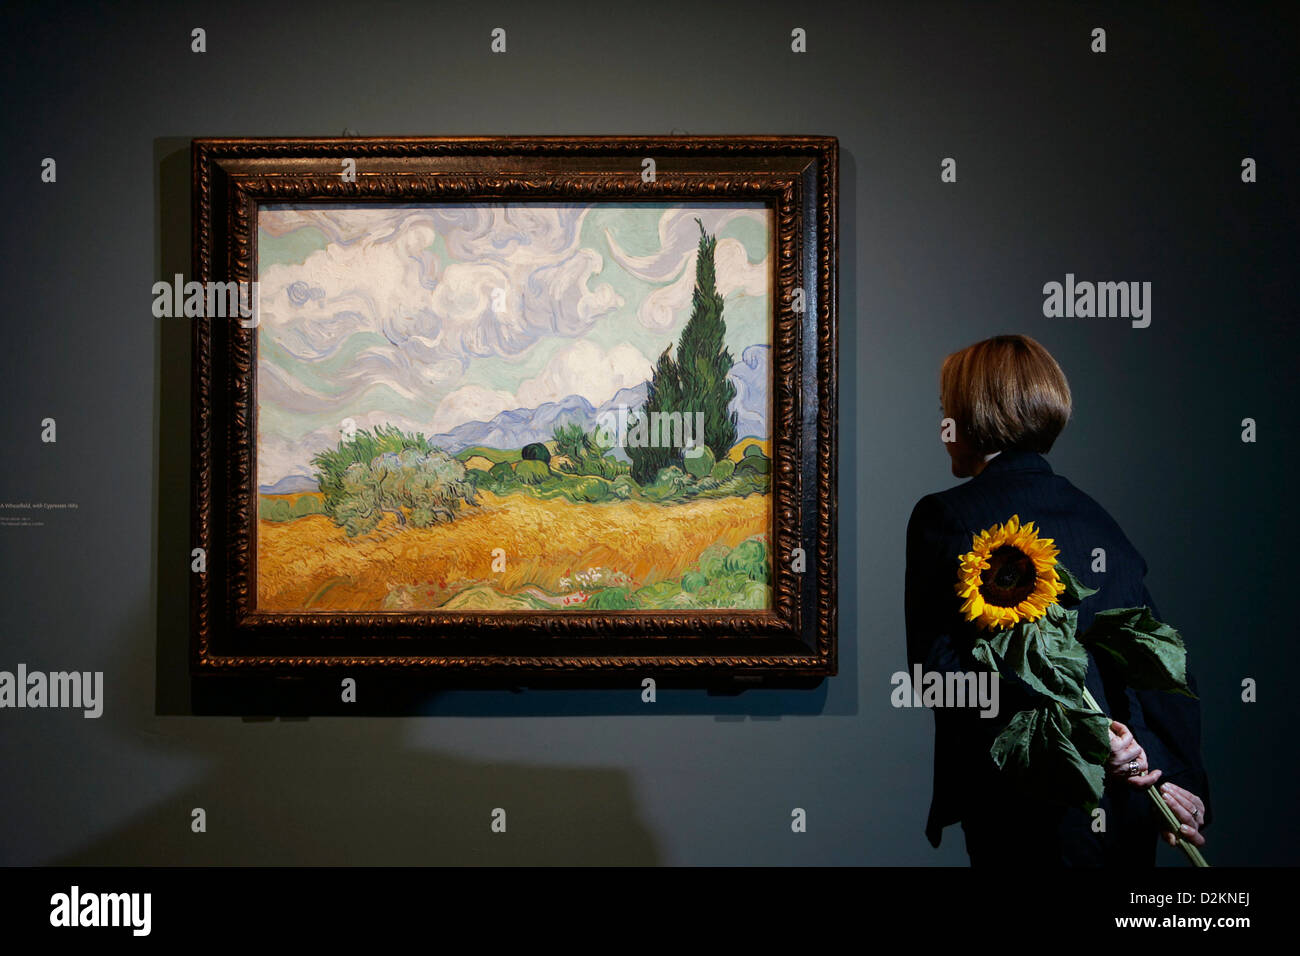 A woman holding a sunflower looks at the 1889 painting 'A Wheatfield, with Cypresses', by Vincent van Gogh Stock Photo